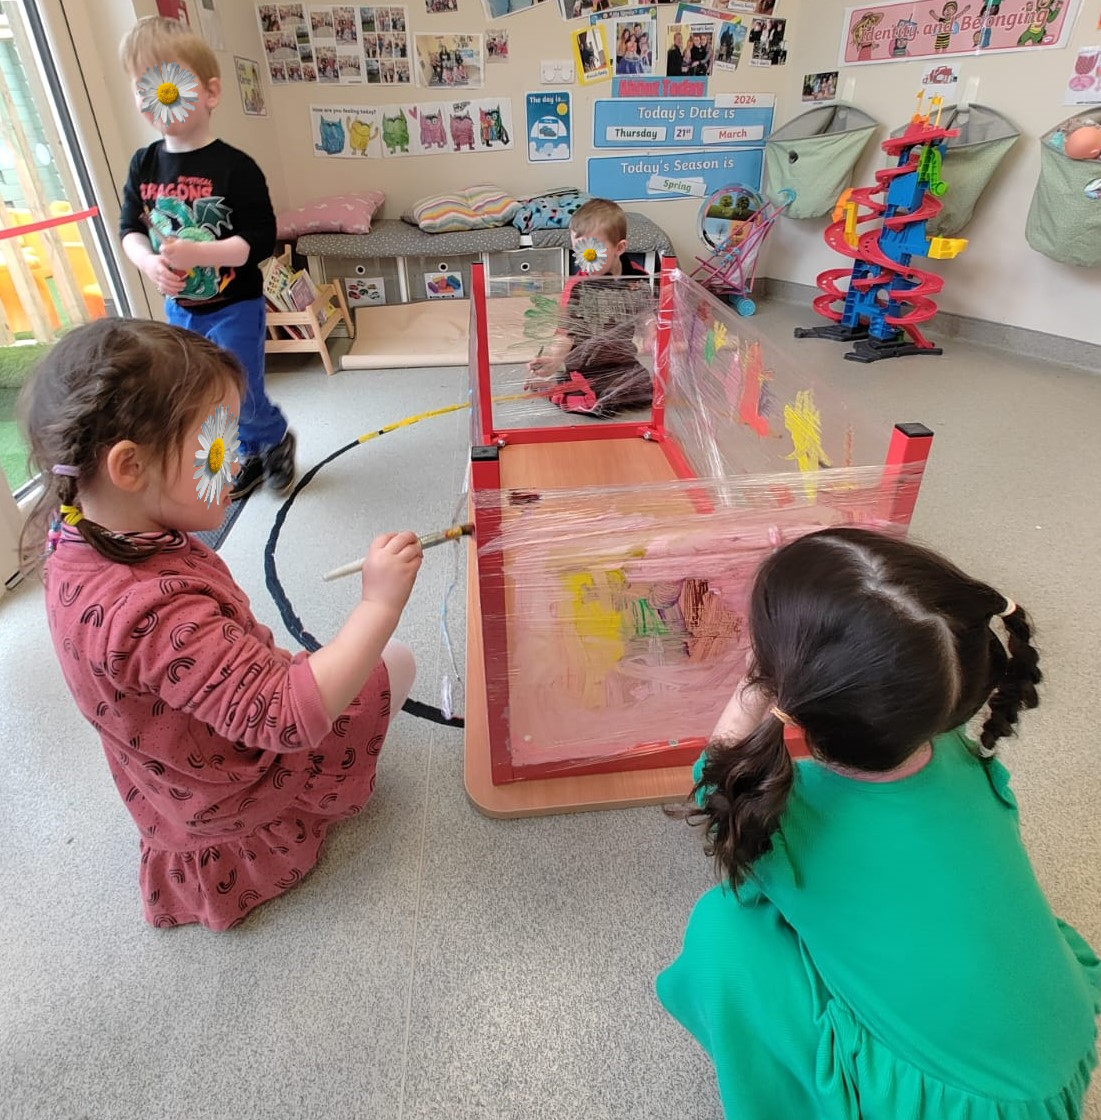 𝐓𝐞𝐫𝐞𝐧𝐮𝐫𝐞 𝐂𝐞𝐧𝐭𝐫𝐞: During arts and crafts time, we wrapped a table using cling film, then the Montessori kids painted the plastic to make a lovely and colourful art mural. #ArtMural #kidspaintingideas #daisychaincare #childcaredublin #daisychaindub #montessoriactivity